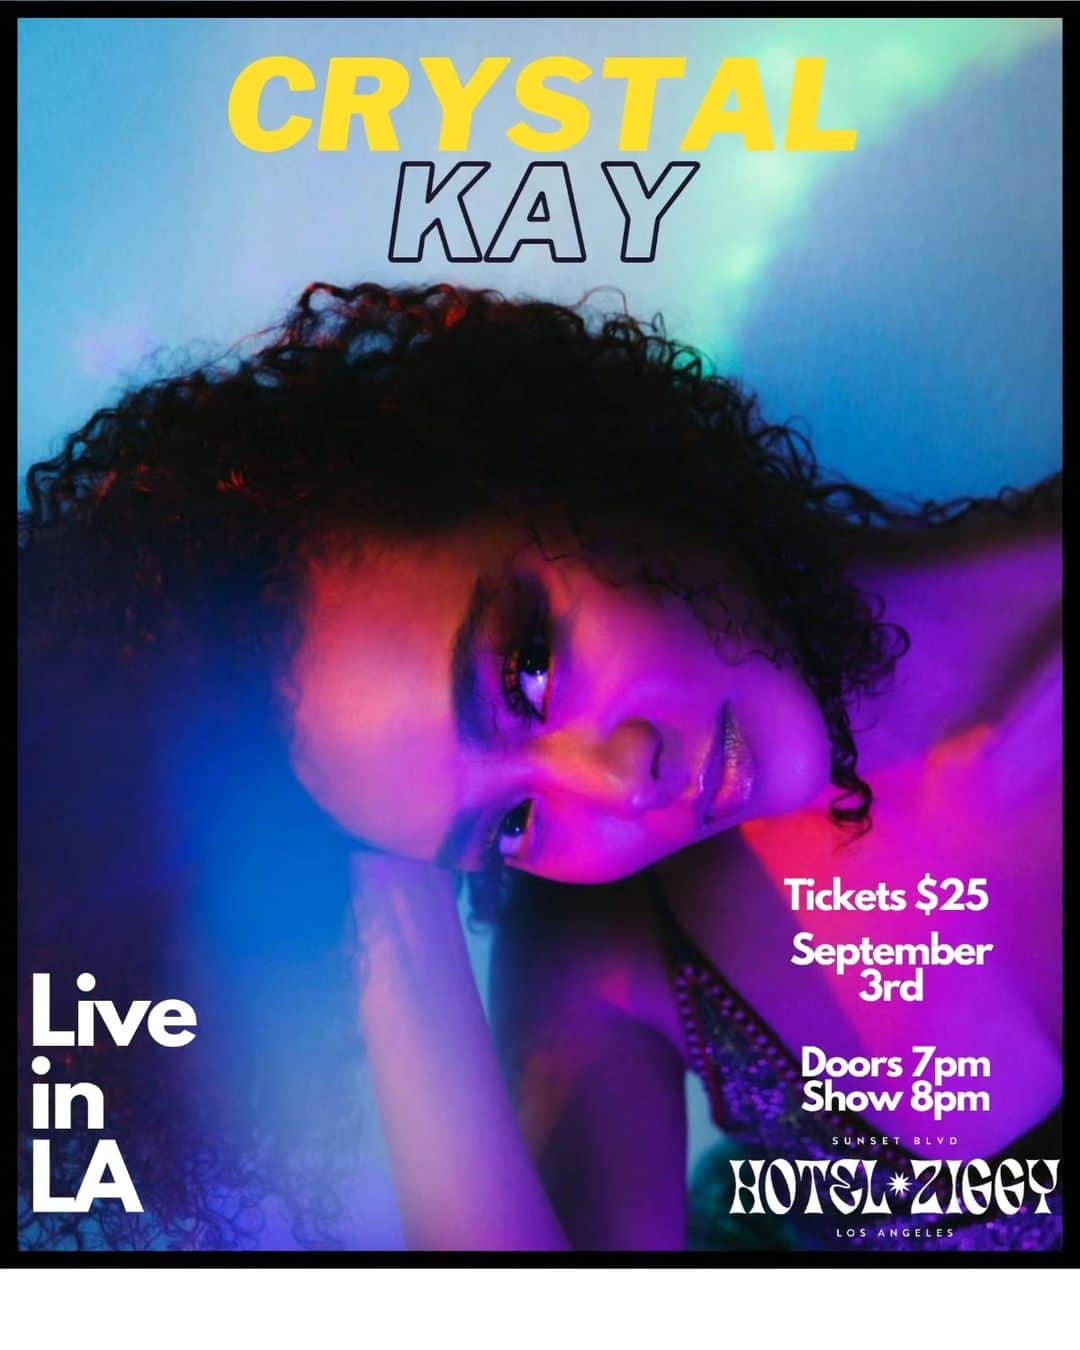 Crystal Kayのインスタグラム：「You want it? You got it😌  MY FIRST SHOW IN LA‼️  SEPT. 3RD @hotelziggy  Doors 7pm Show time 8pm  I can't wait to see you all up close and personal‼️  It's gonna be nice and cosy 🫶  Tickets available now!! Click on link in bio 🎟️  初のロスライブ開催決定‼️ ９月３日ホテルジギーにて🫶 会場19:00 開演20:00  チケット発売スタート！！ トップページにリンクはってます👍  最高に楽しもう💕ロスのみんなに会えるの楽しみ‼️」